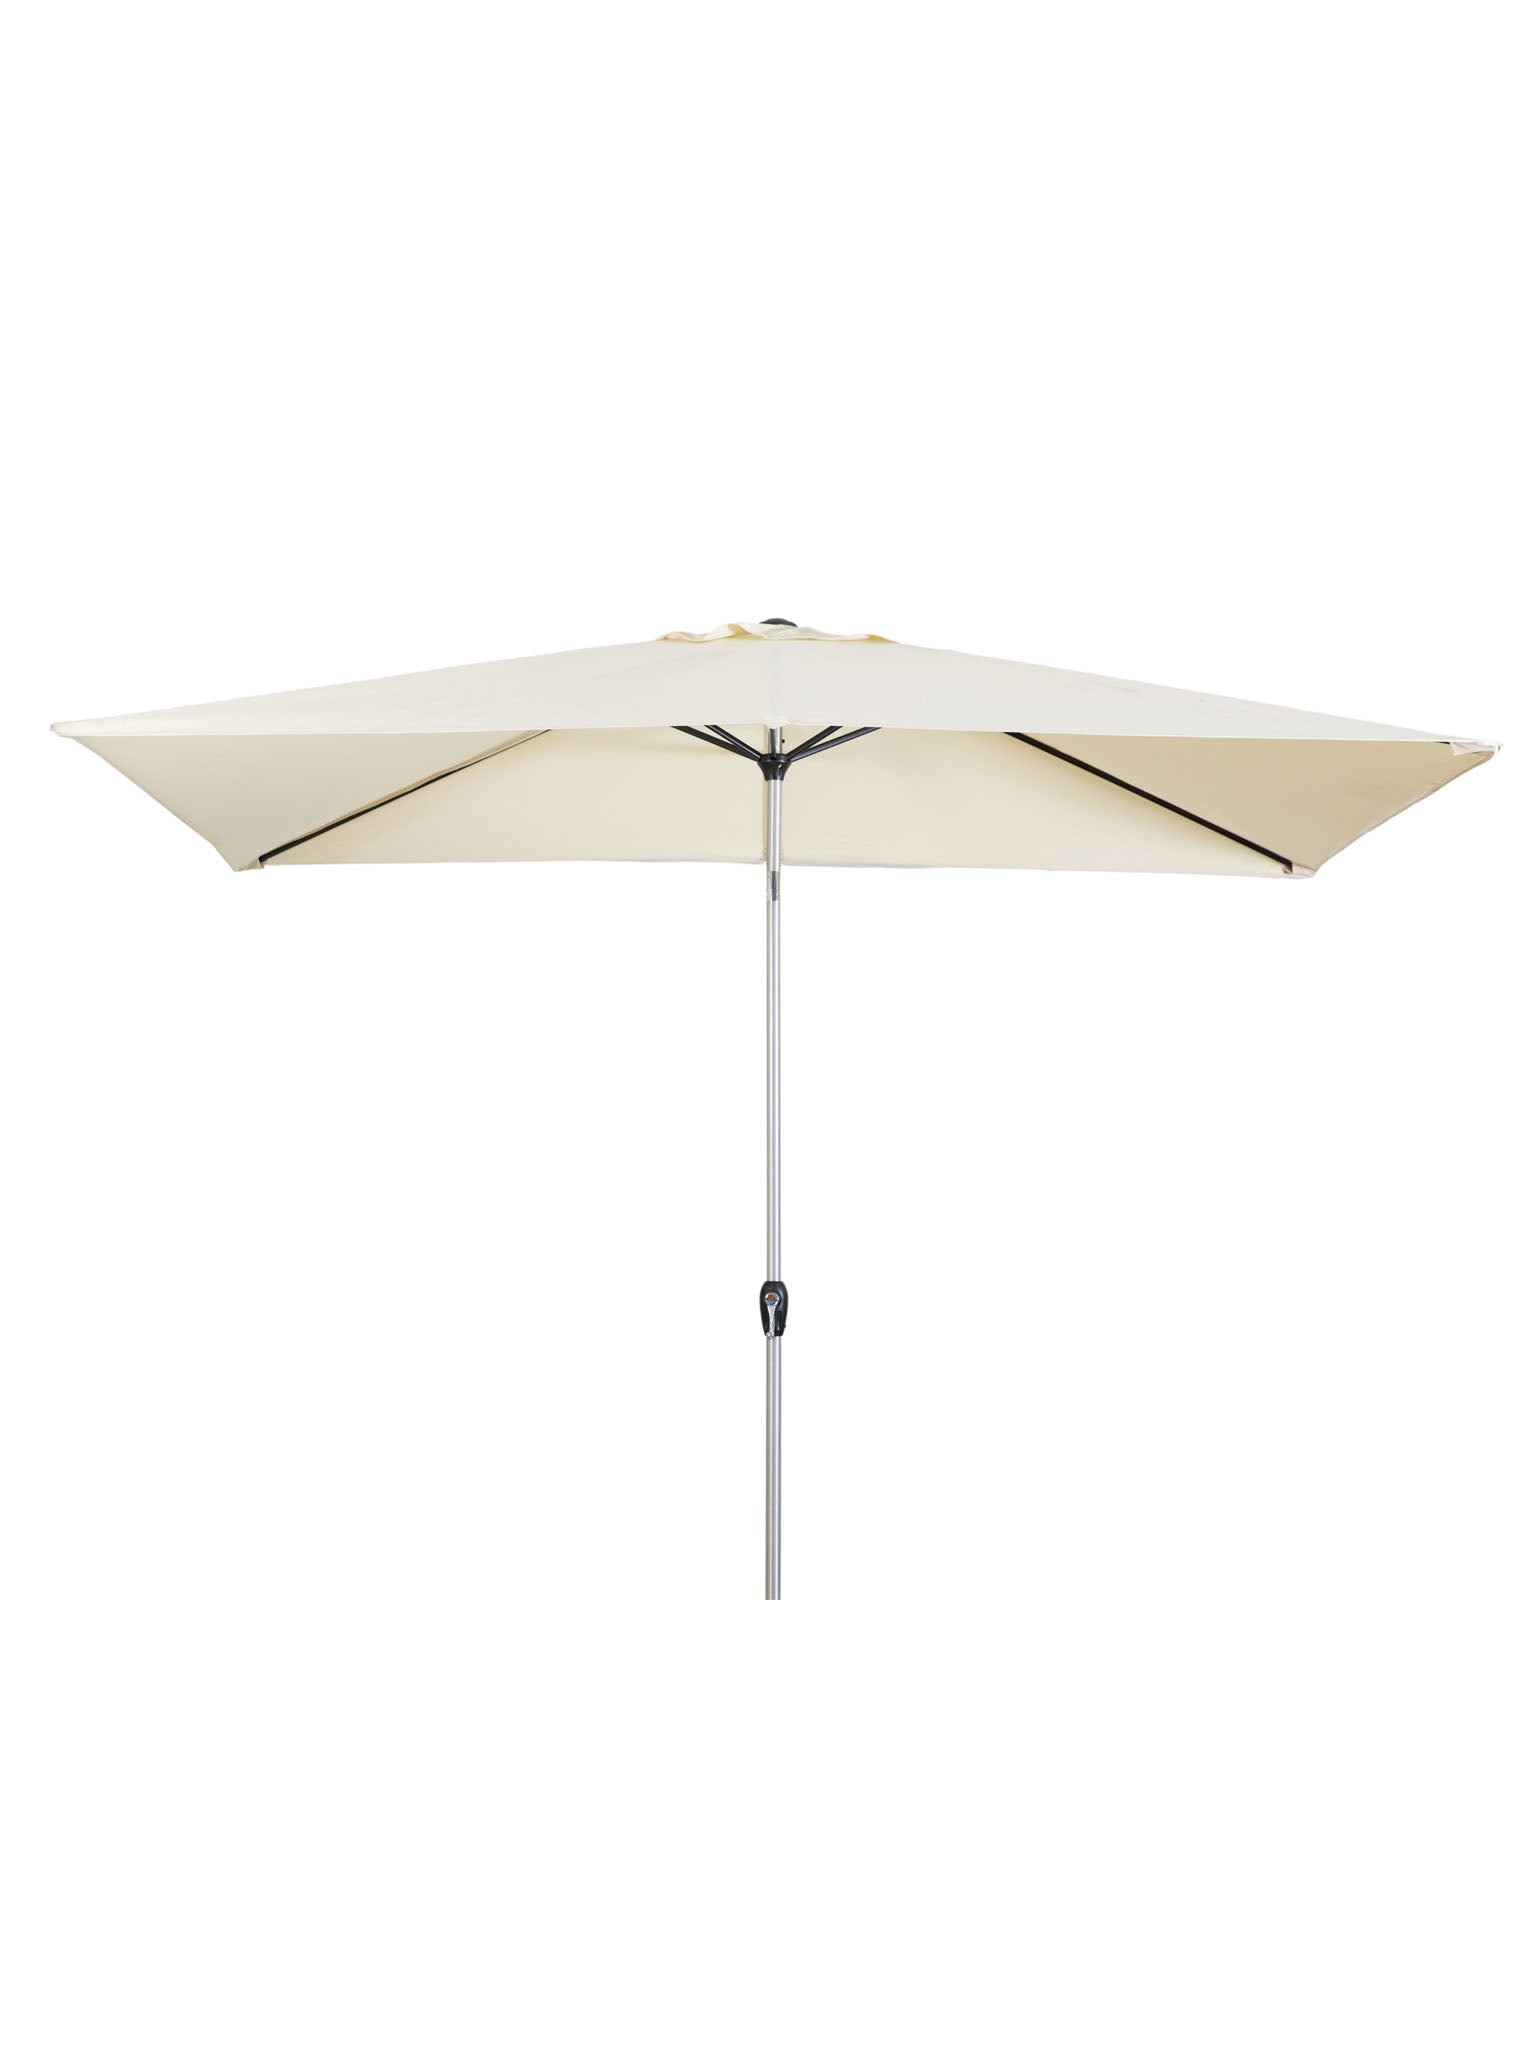 This 2x3m Parasol offers an unusual rectangular design. It features a tilt and crank mechanism, for easy adjustment of the parasol.